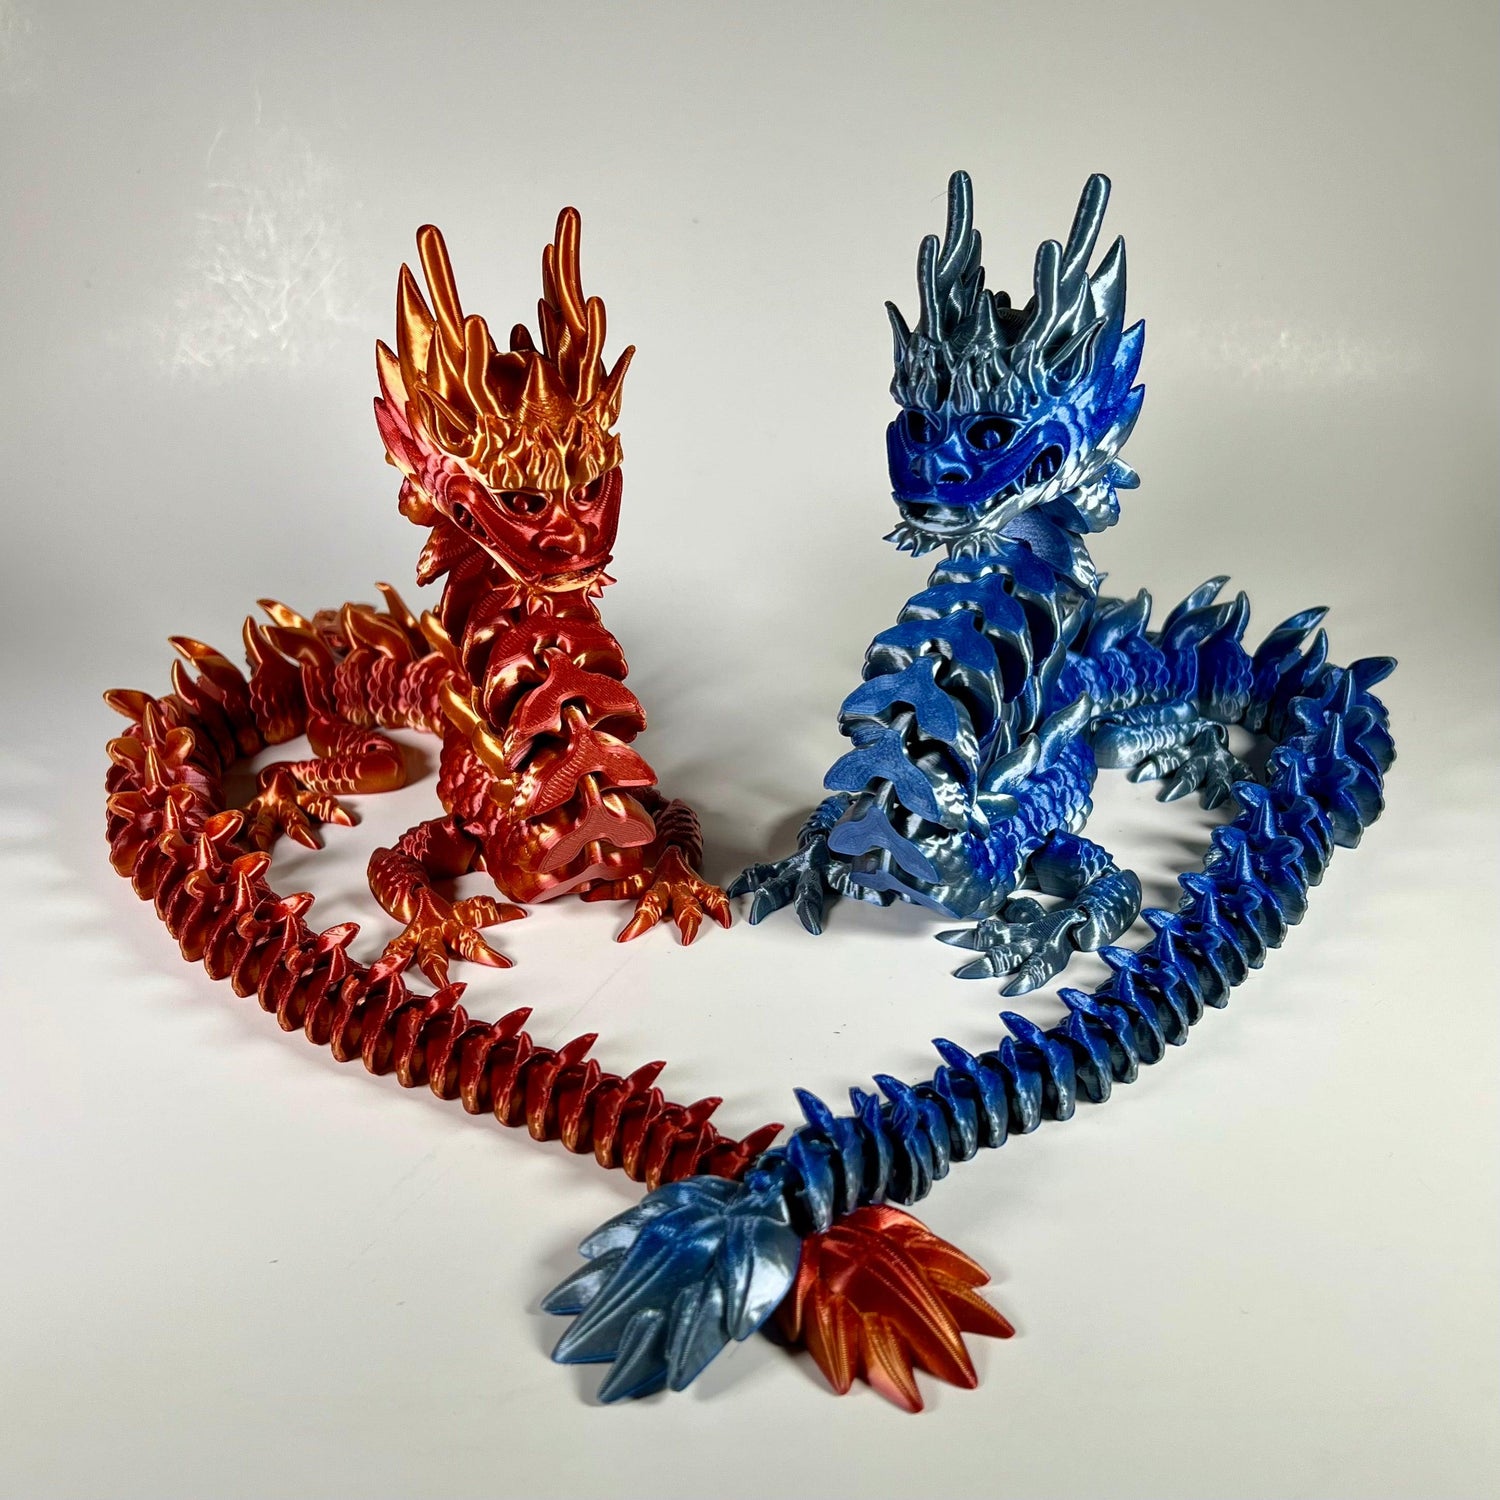 3D Printed Fidgets and More - Cinder House Creations